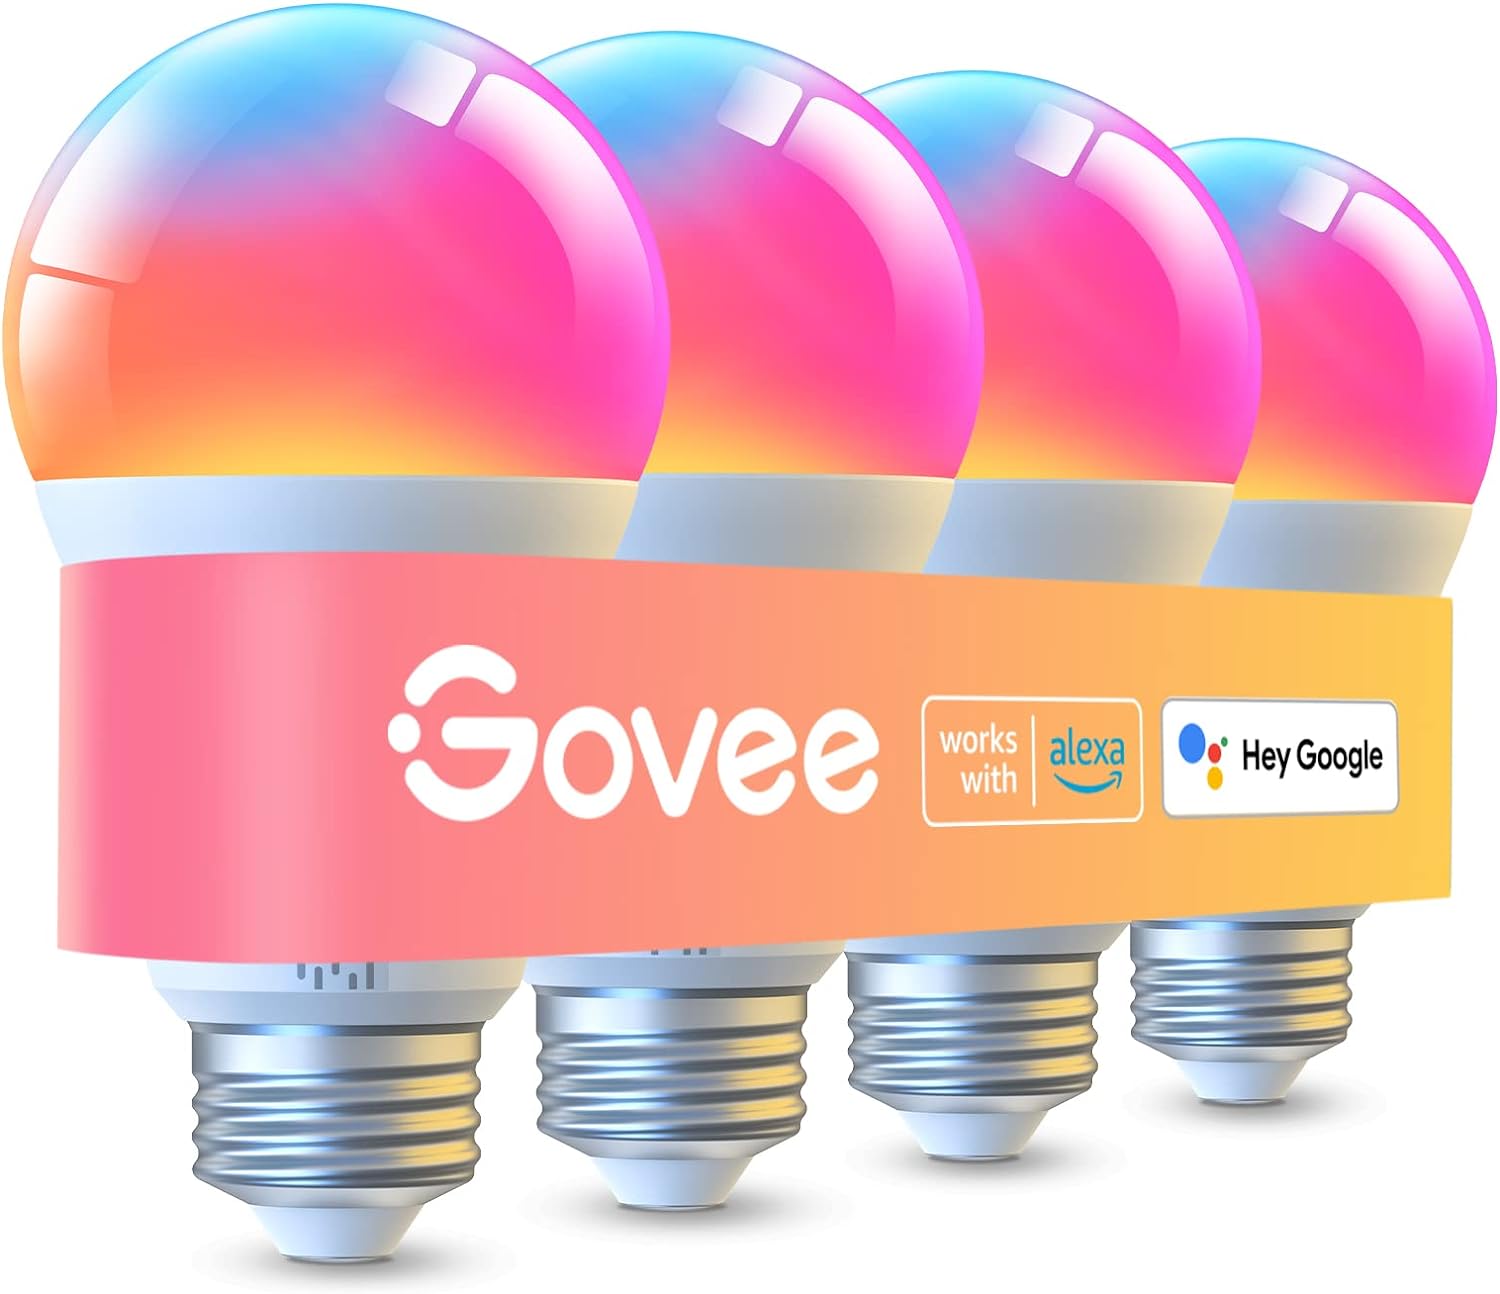 Govee Smart A19 LED Light Bulbs, 1000LM RGBWW Dimmable, Wi-Fi & Bluetooth Color Changing Light Bulbs, Works with Alexa & Google Assistant No Hub Required, 75W Equivalent Smart Bulbs, 4 Pack